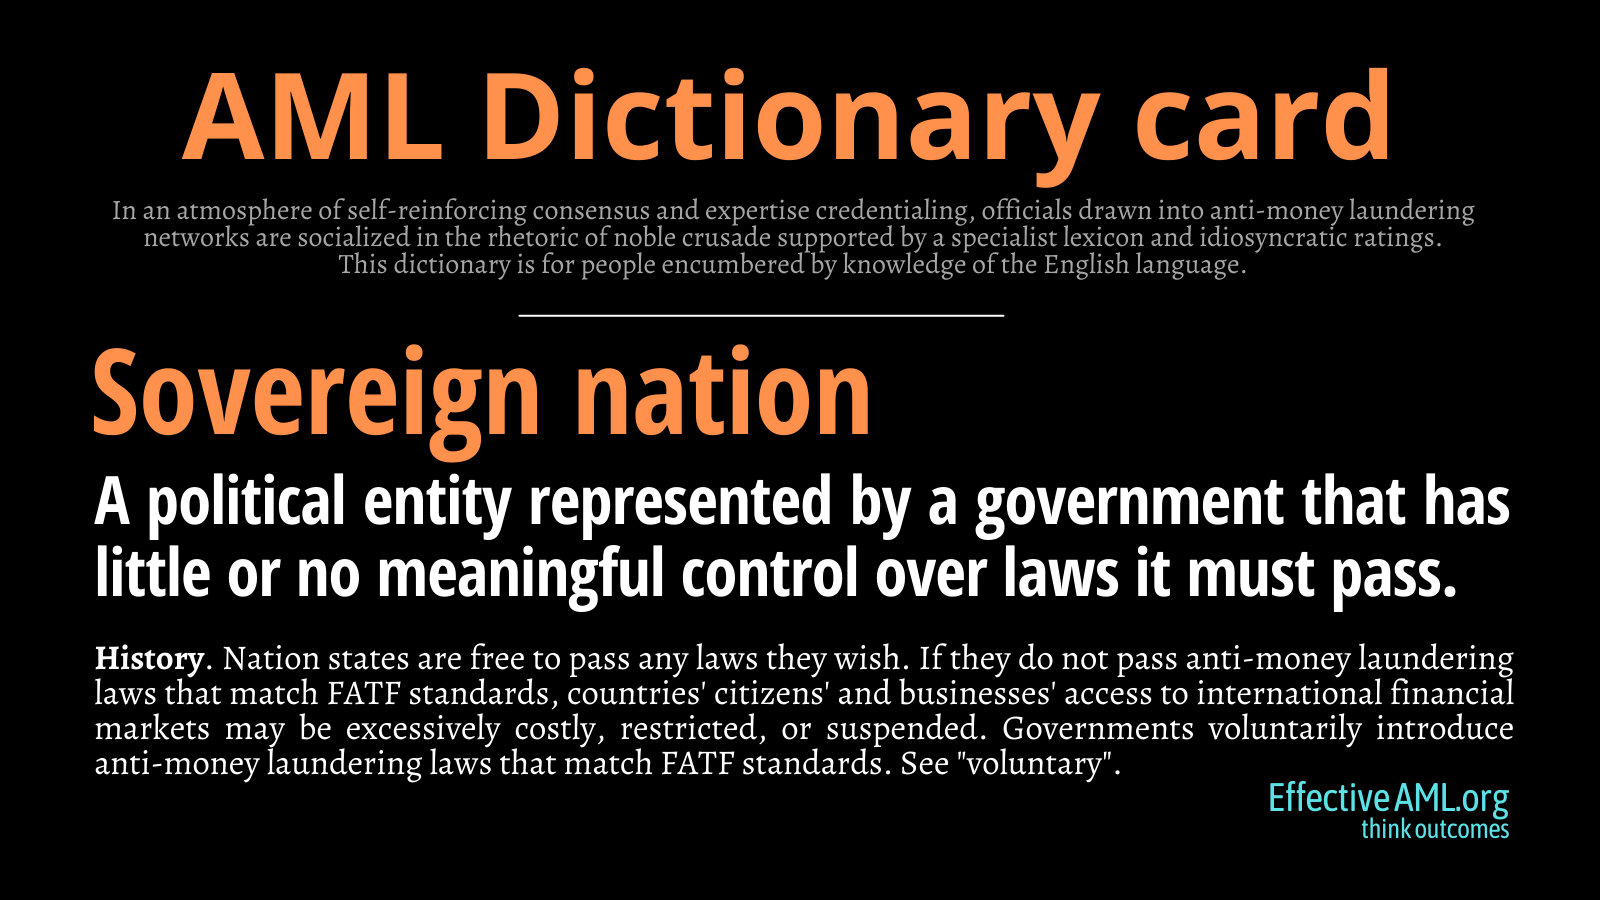 AML Dictionary: “Sovereign nation”